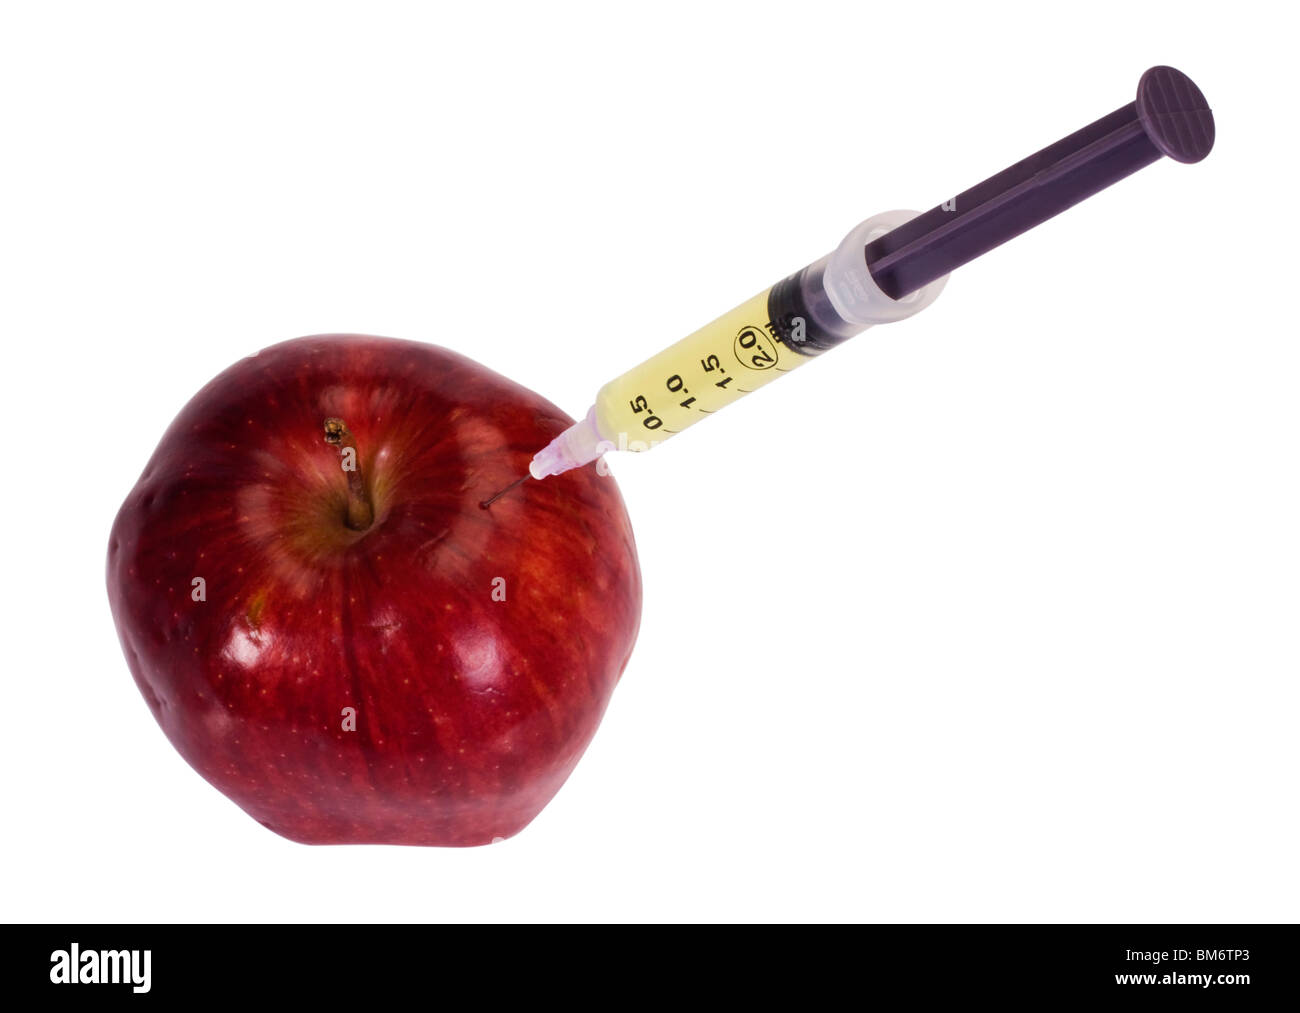 Syringe being injected into an apple Stock Photo